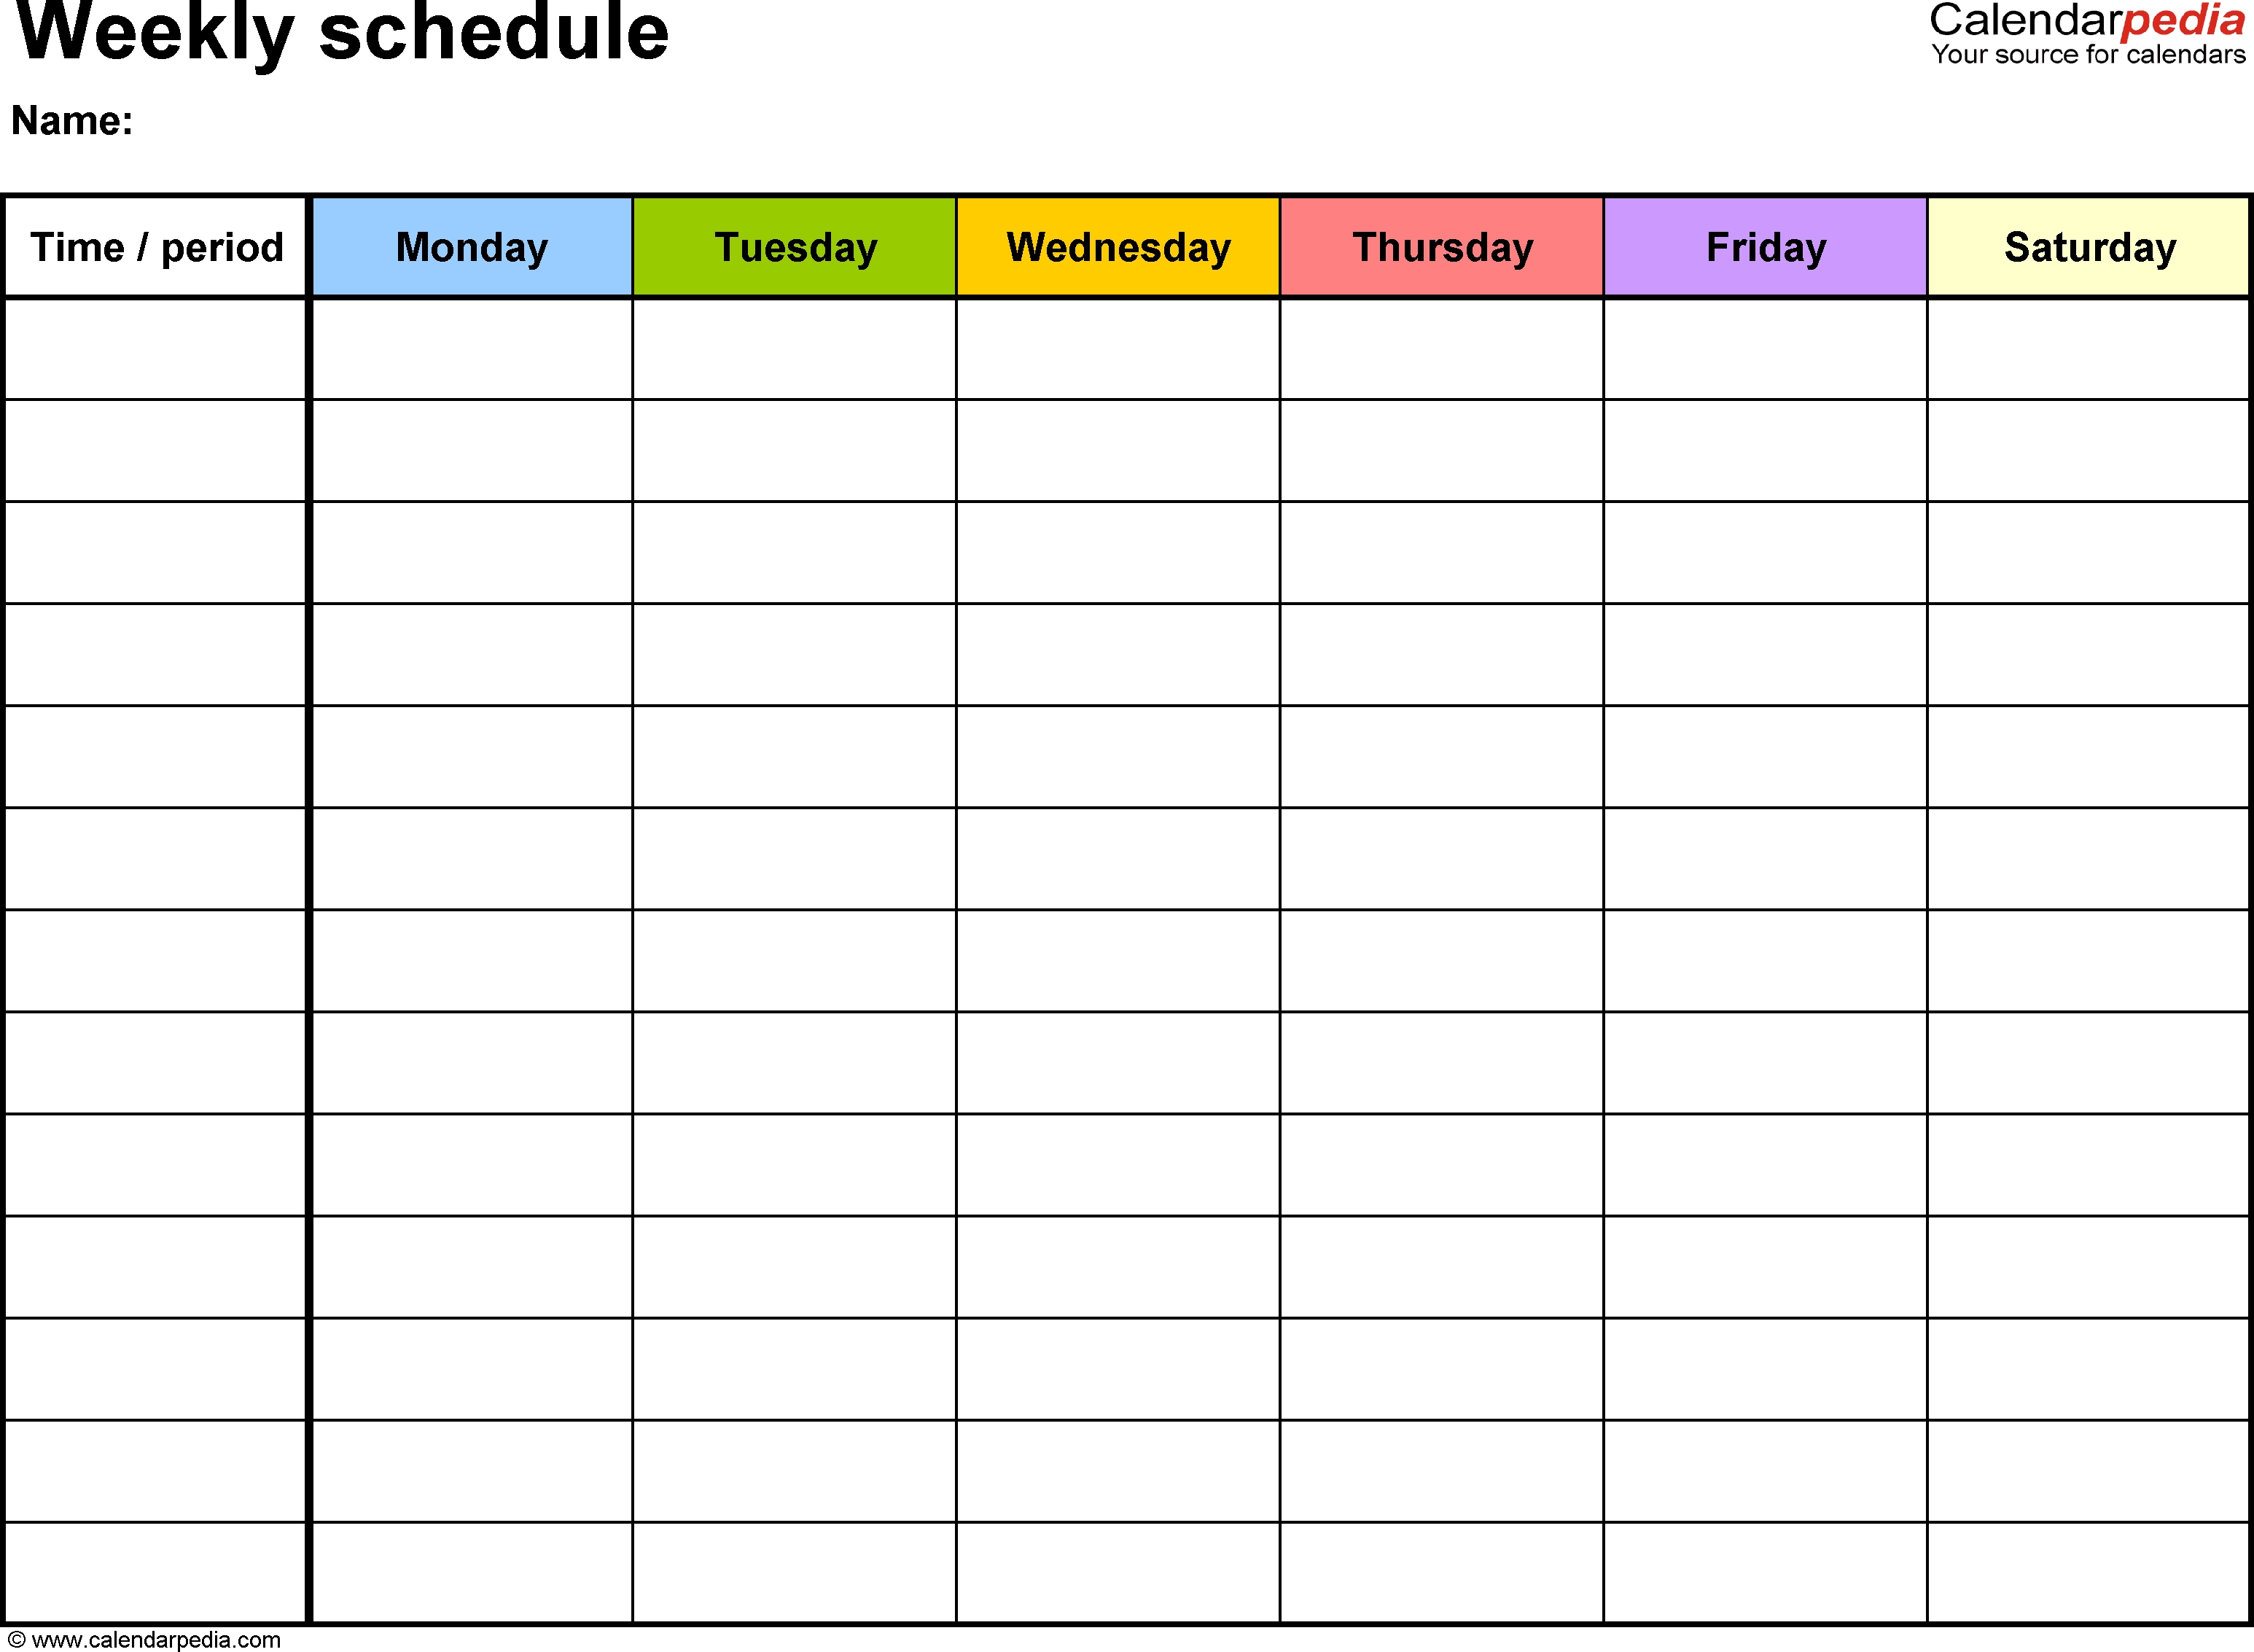 Free Weekly Schedule Templates For Word - 18 Templates-Monday Through Friday Schedule Template